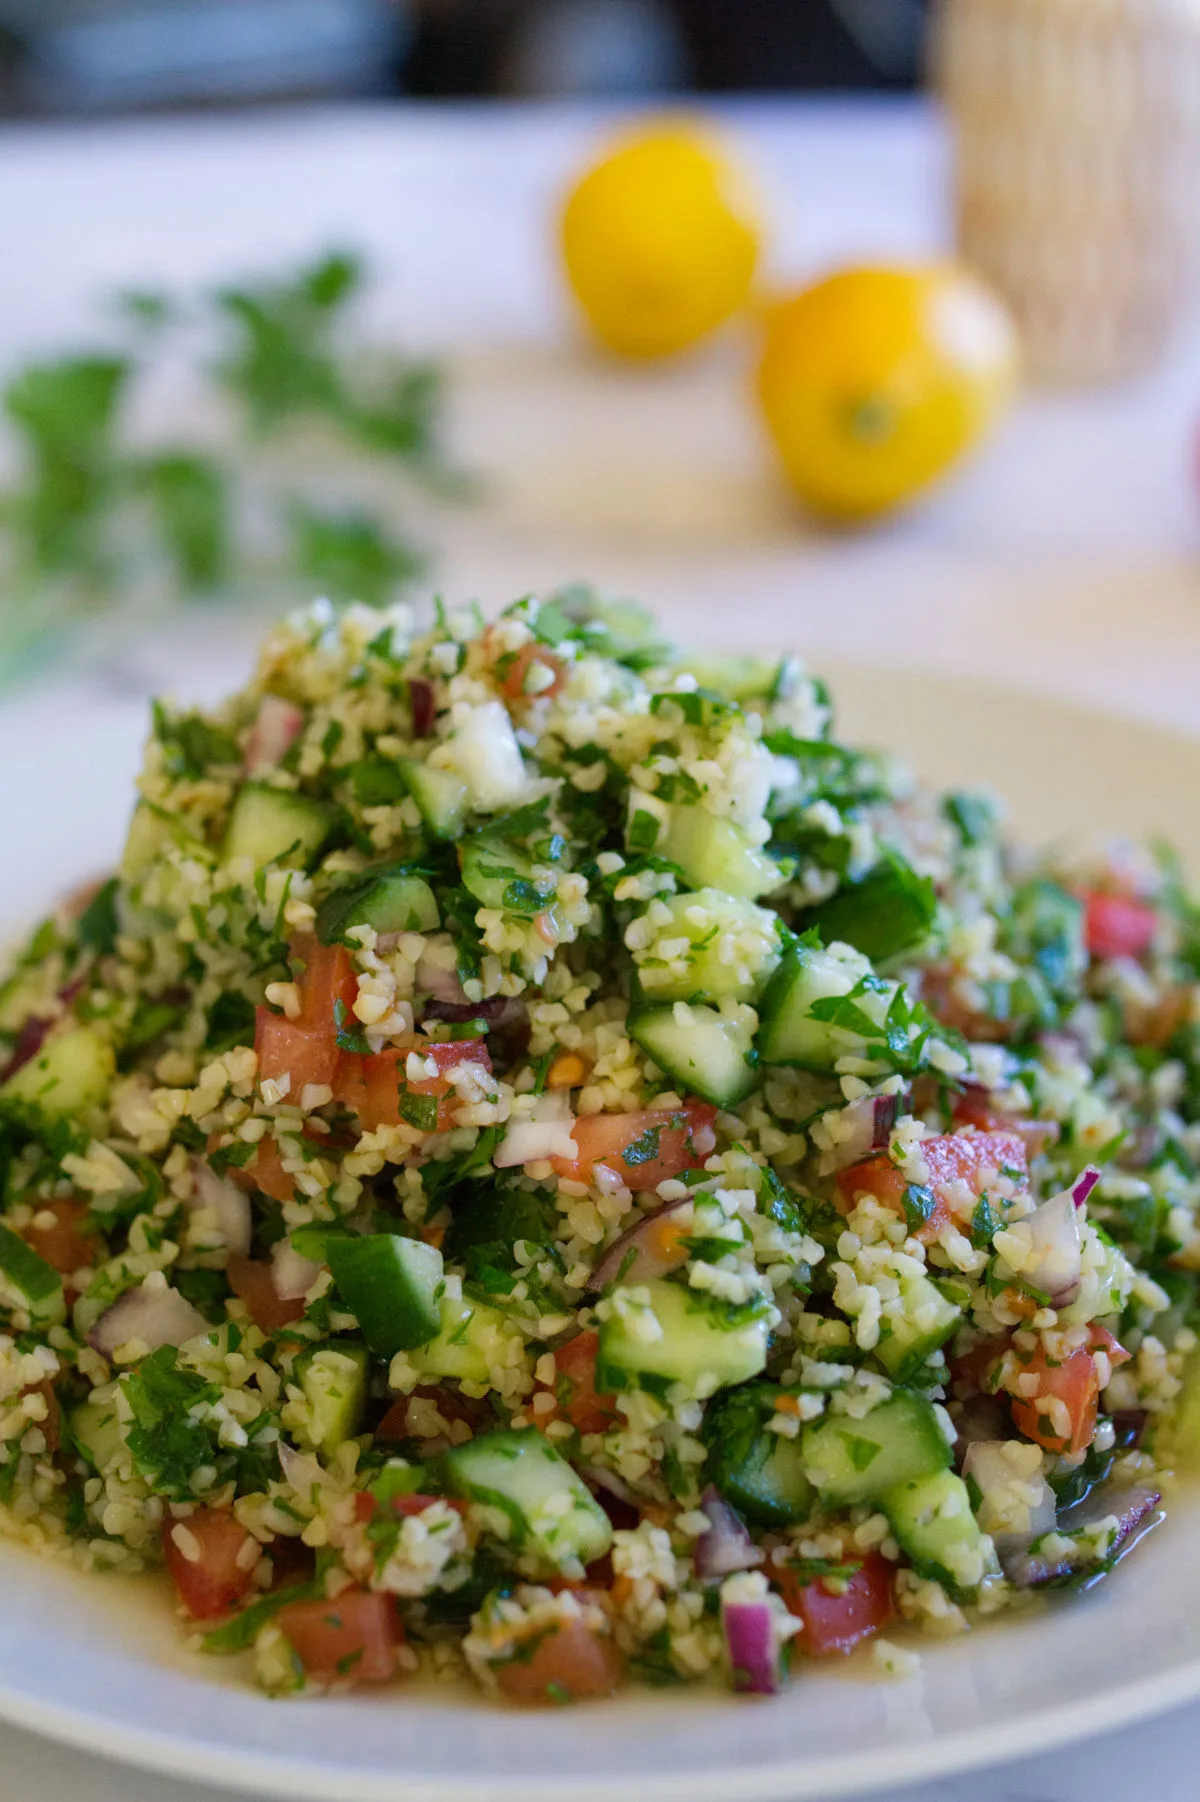 A large bowl of tabbouleh.